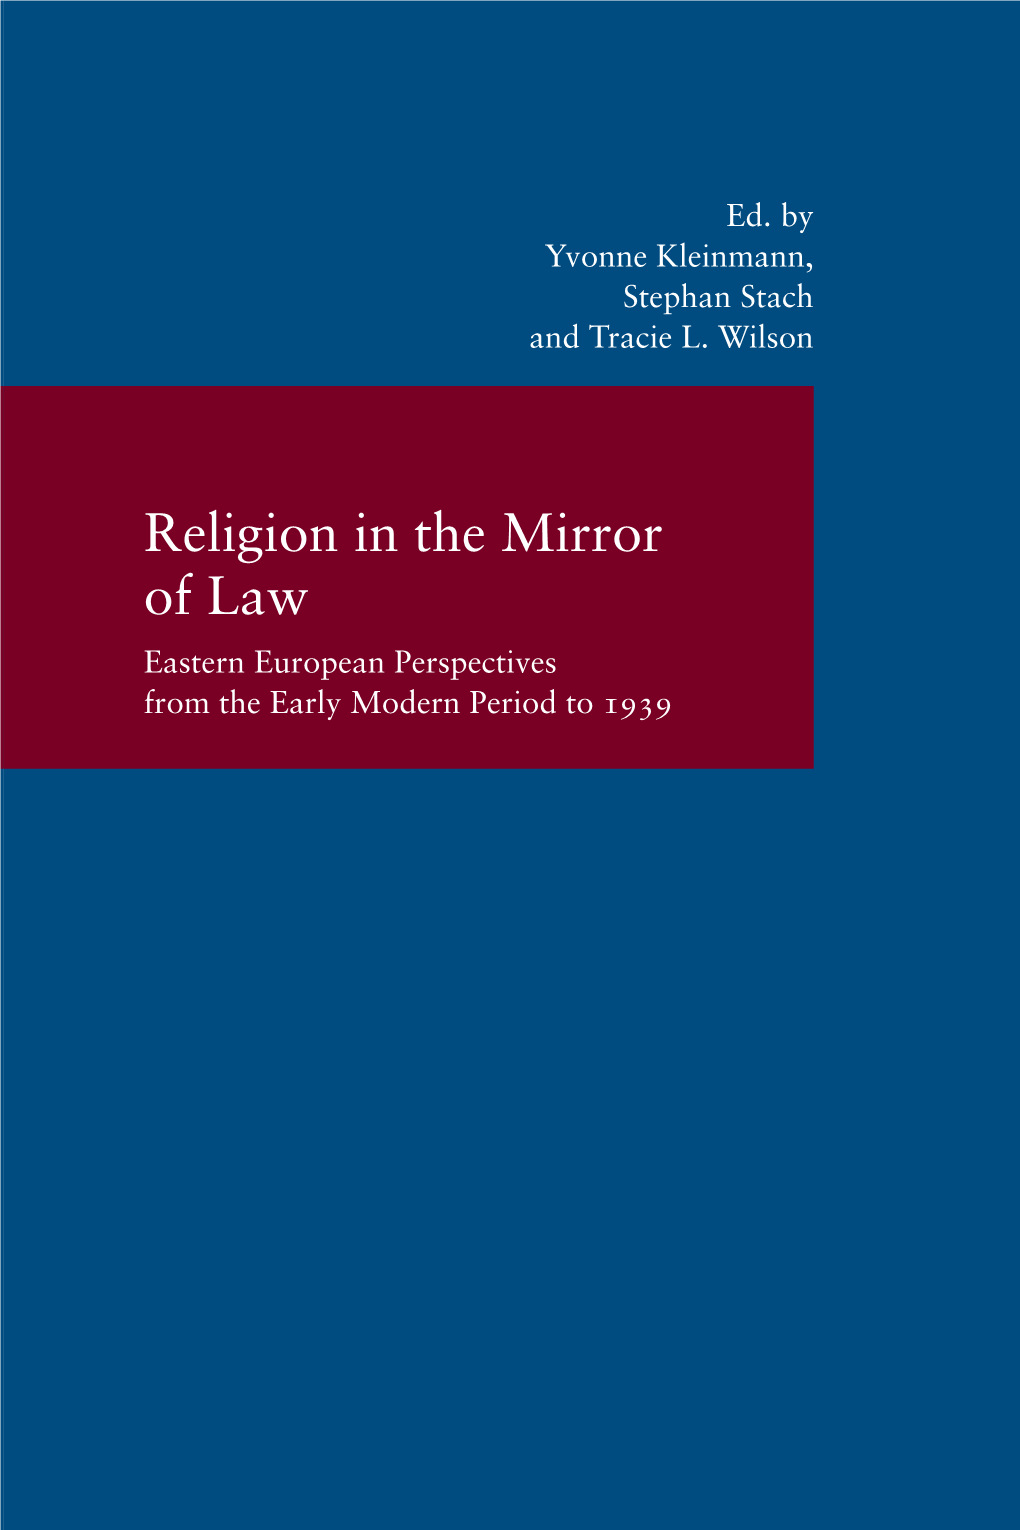 Religion in the Mirror of Law. Eastern European Perspectives from The